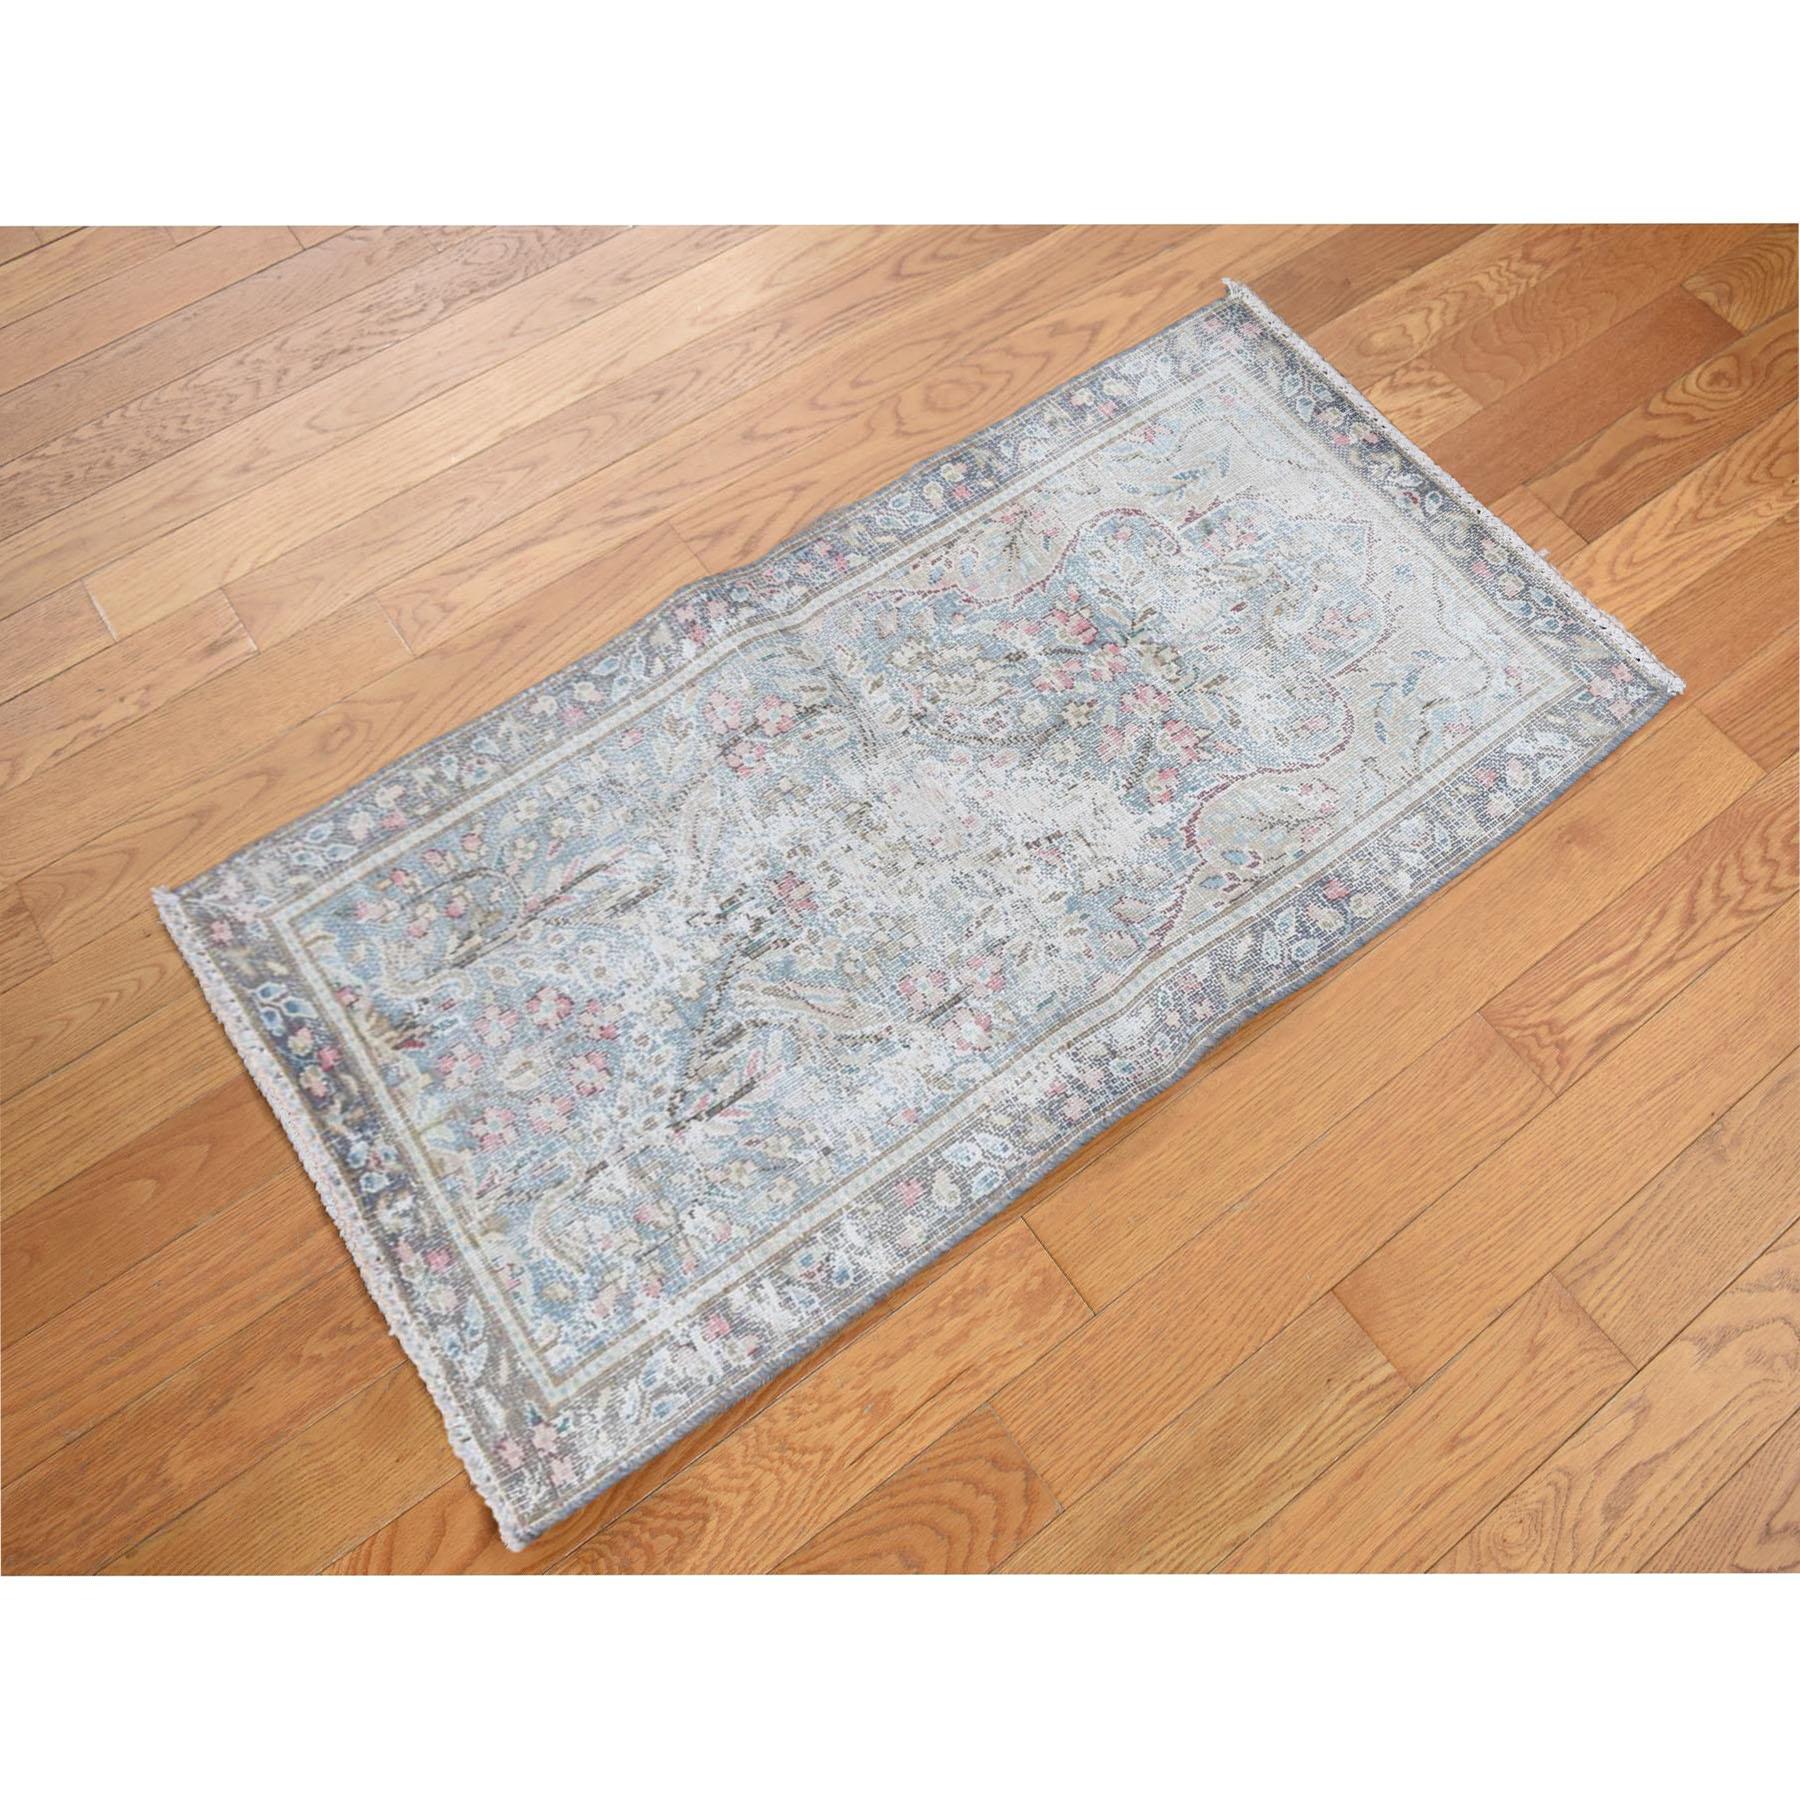 This fabulous Hand-Knotted carpet has been created and designed for extra strength and durability. This rug has been handcrafted for weeks in the traditional method that is used to make
Exact Rug Size in Feet and Inches : 1'10